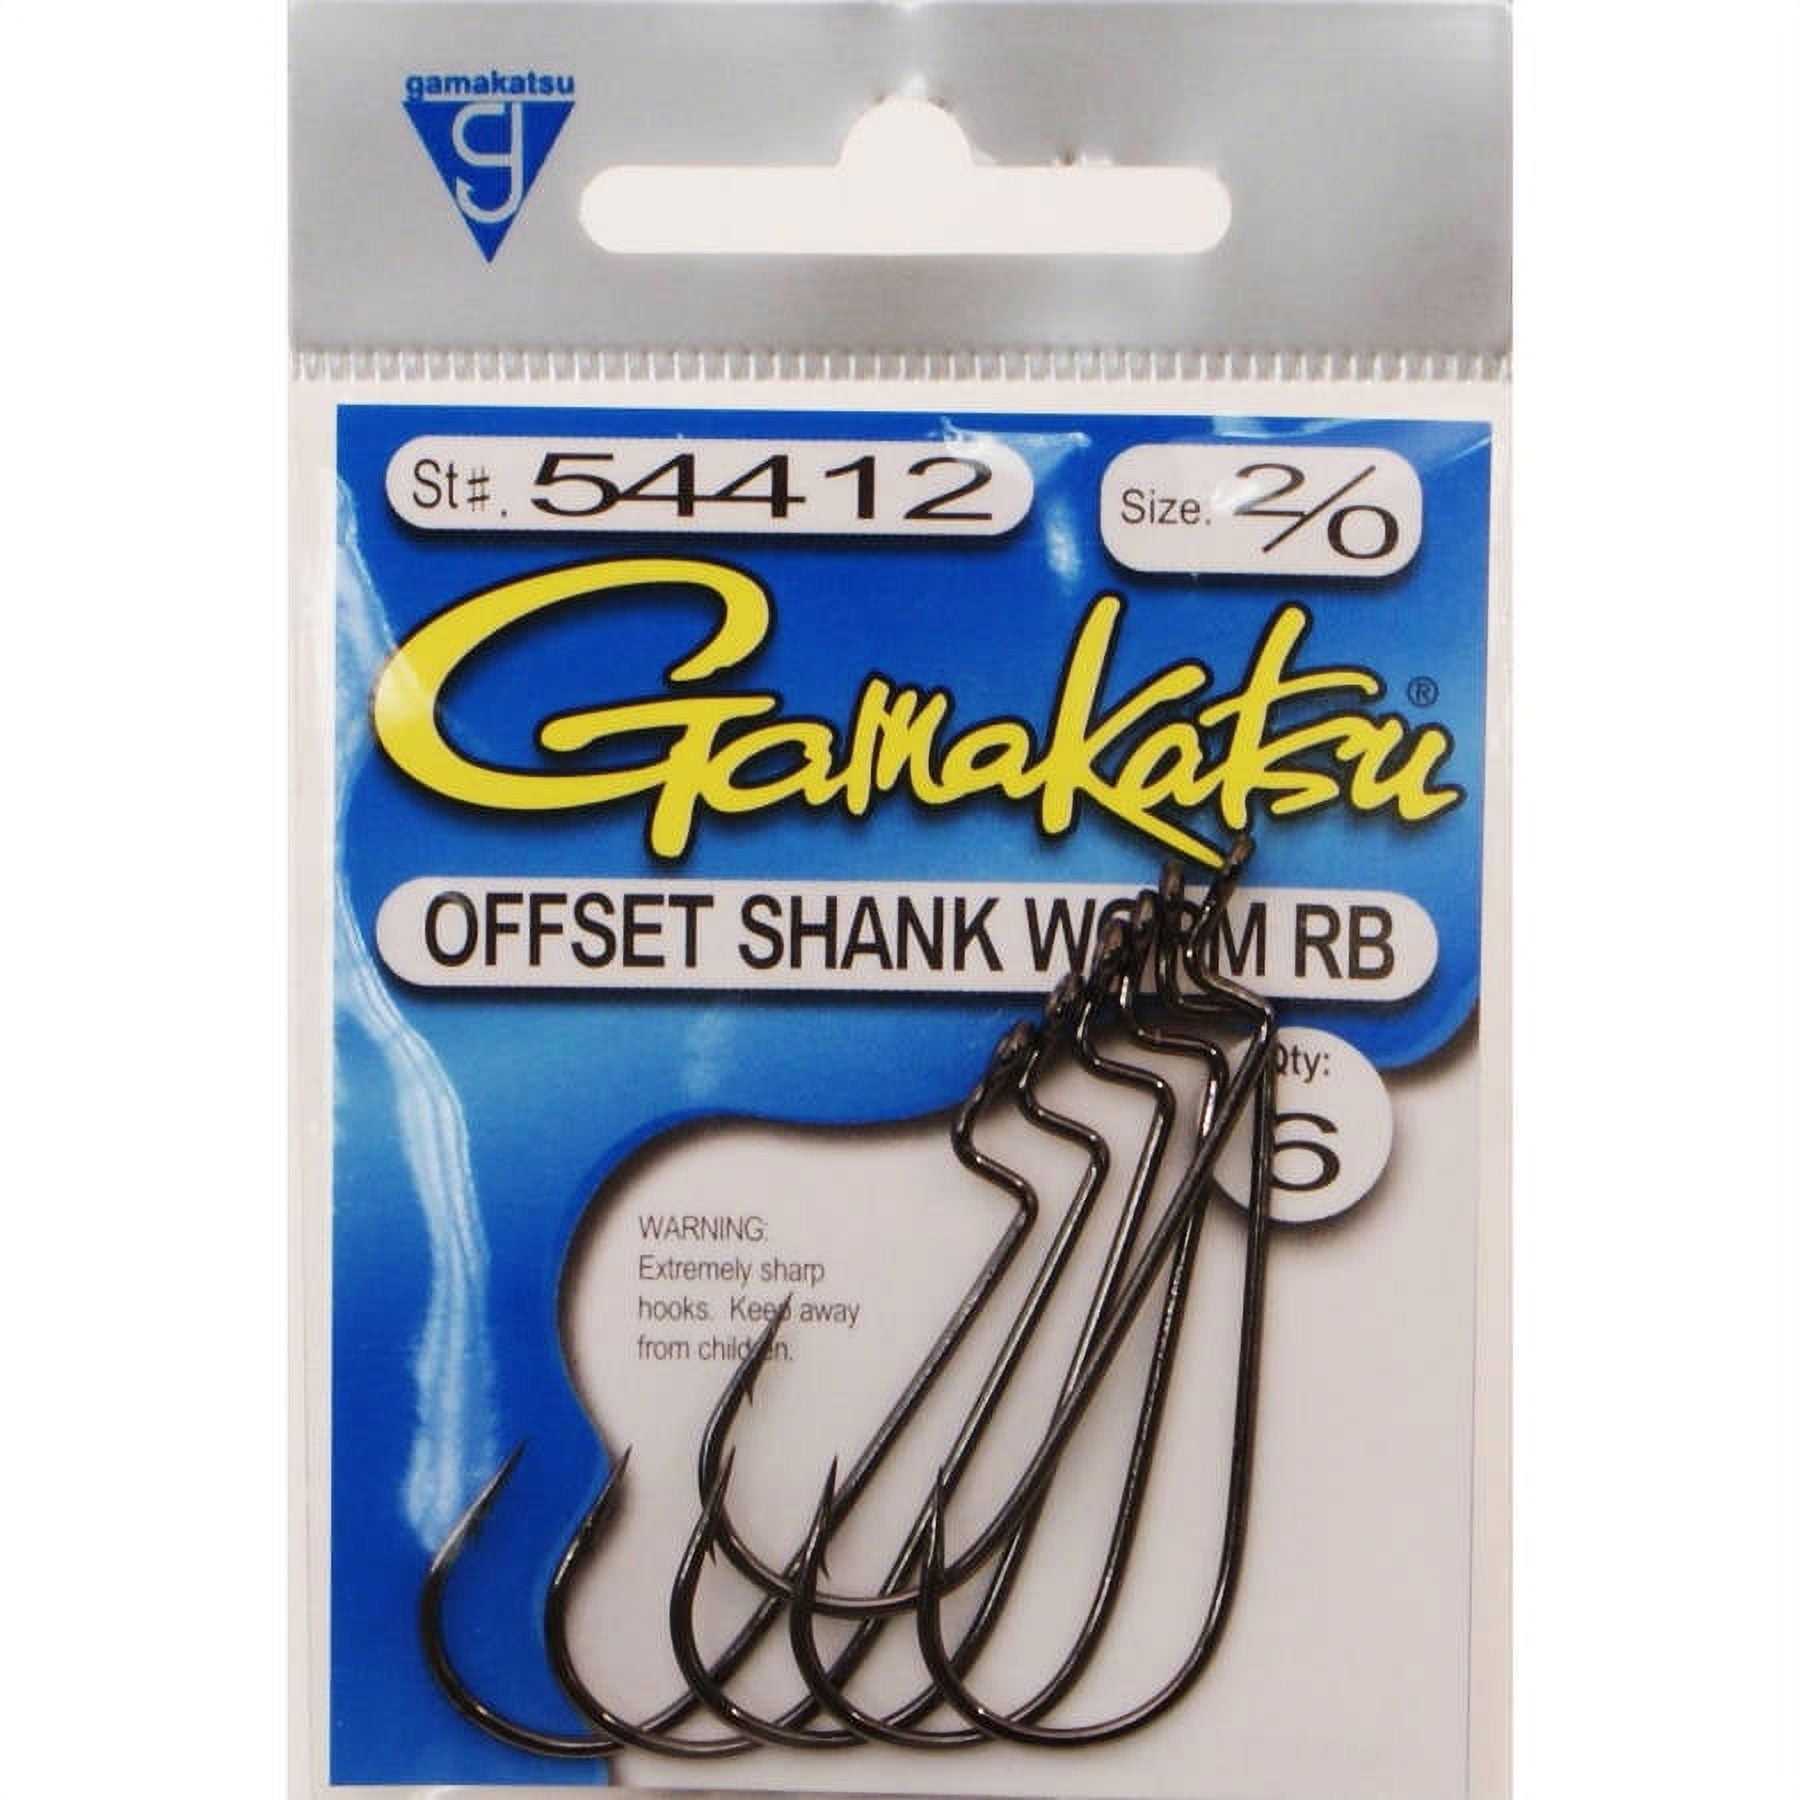 Gamakatsu Worm Offset Round Bend Hook in High Quality Carbon Steel, NS  Black, Size 2/0, 6-Pack